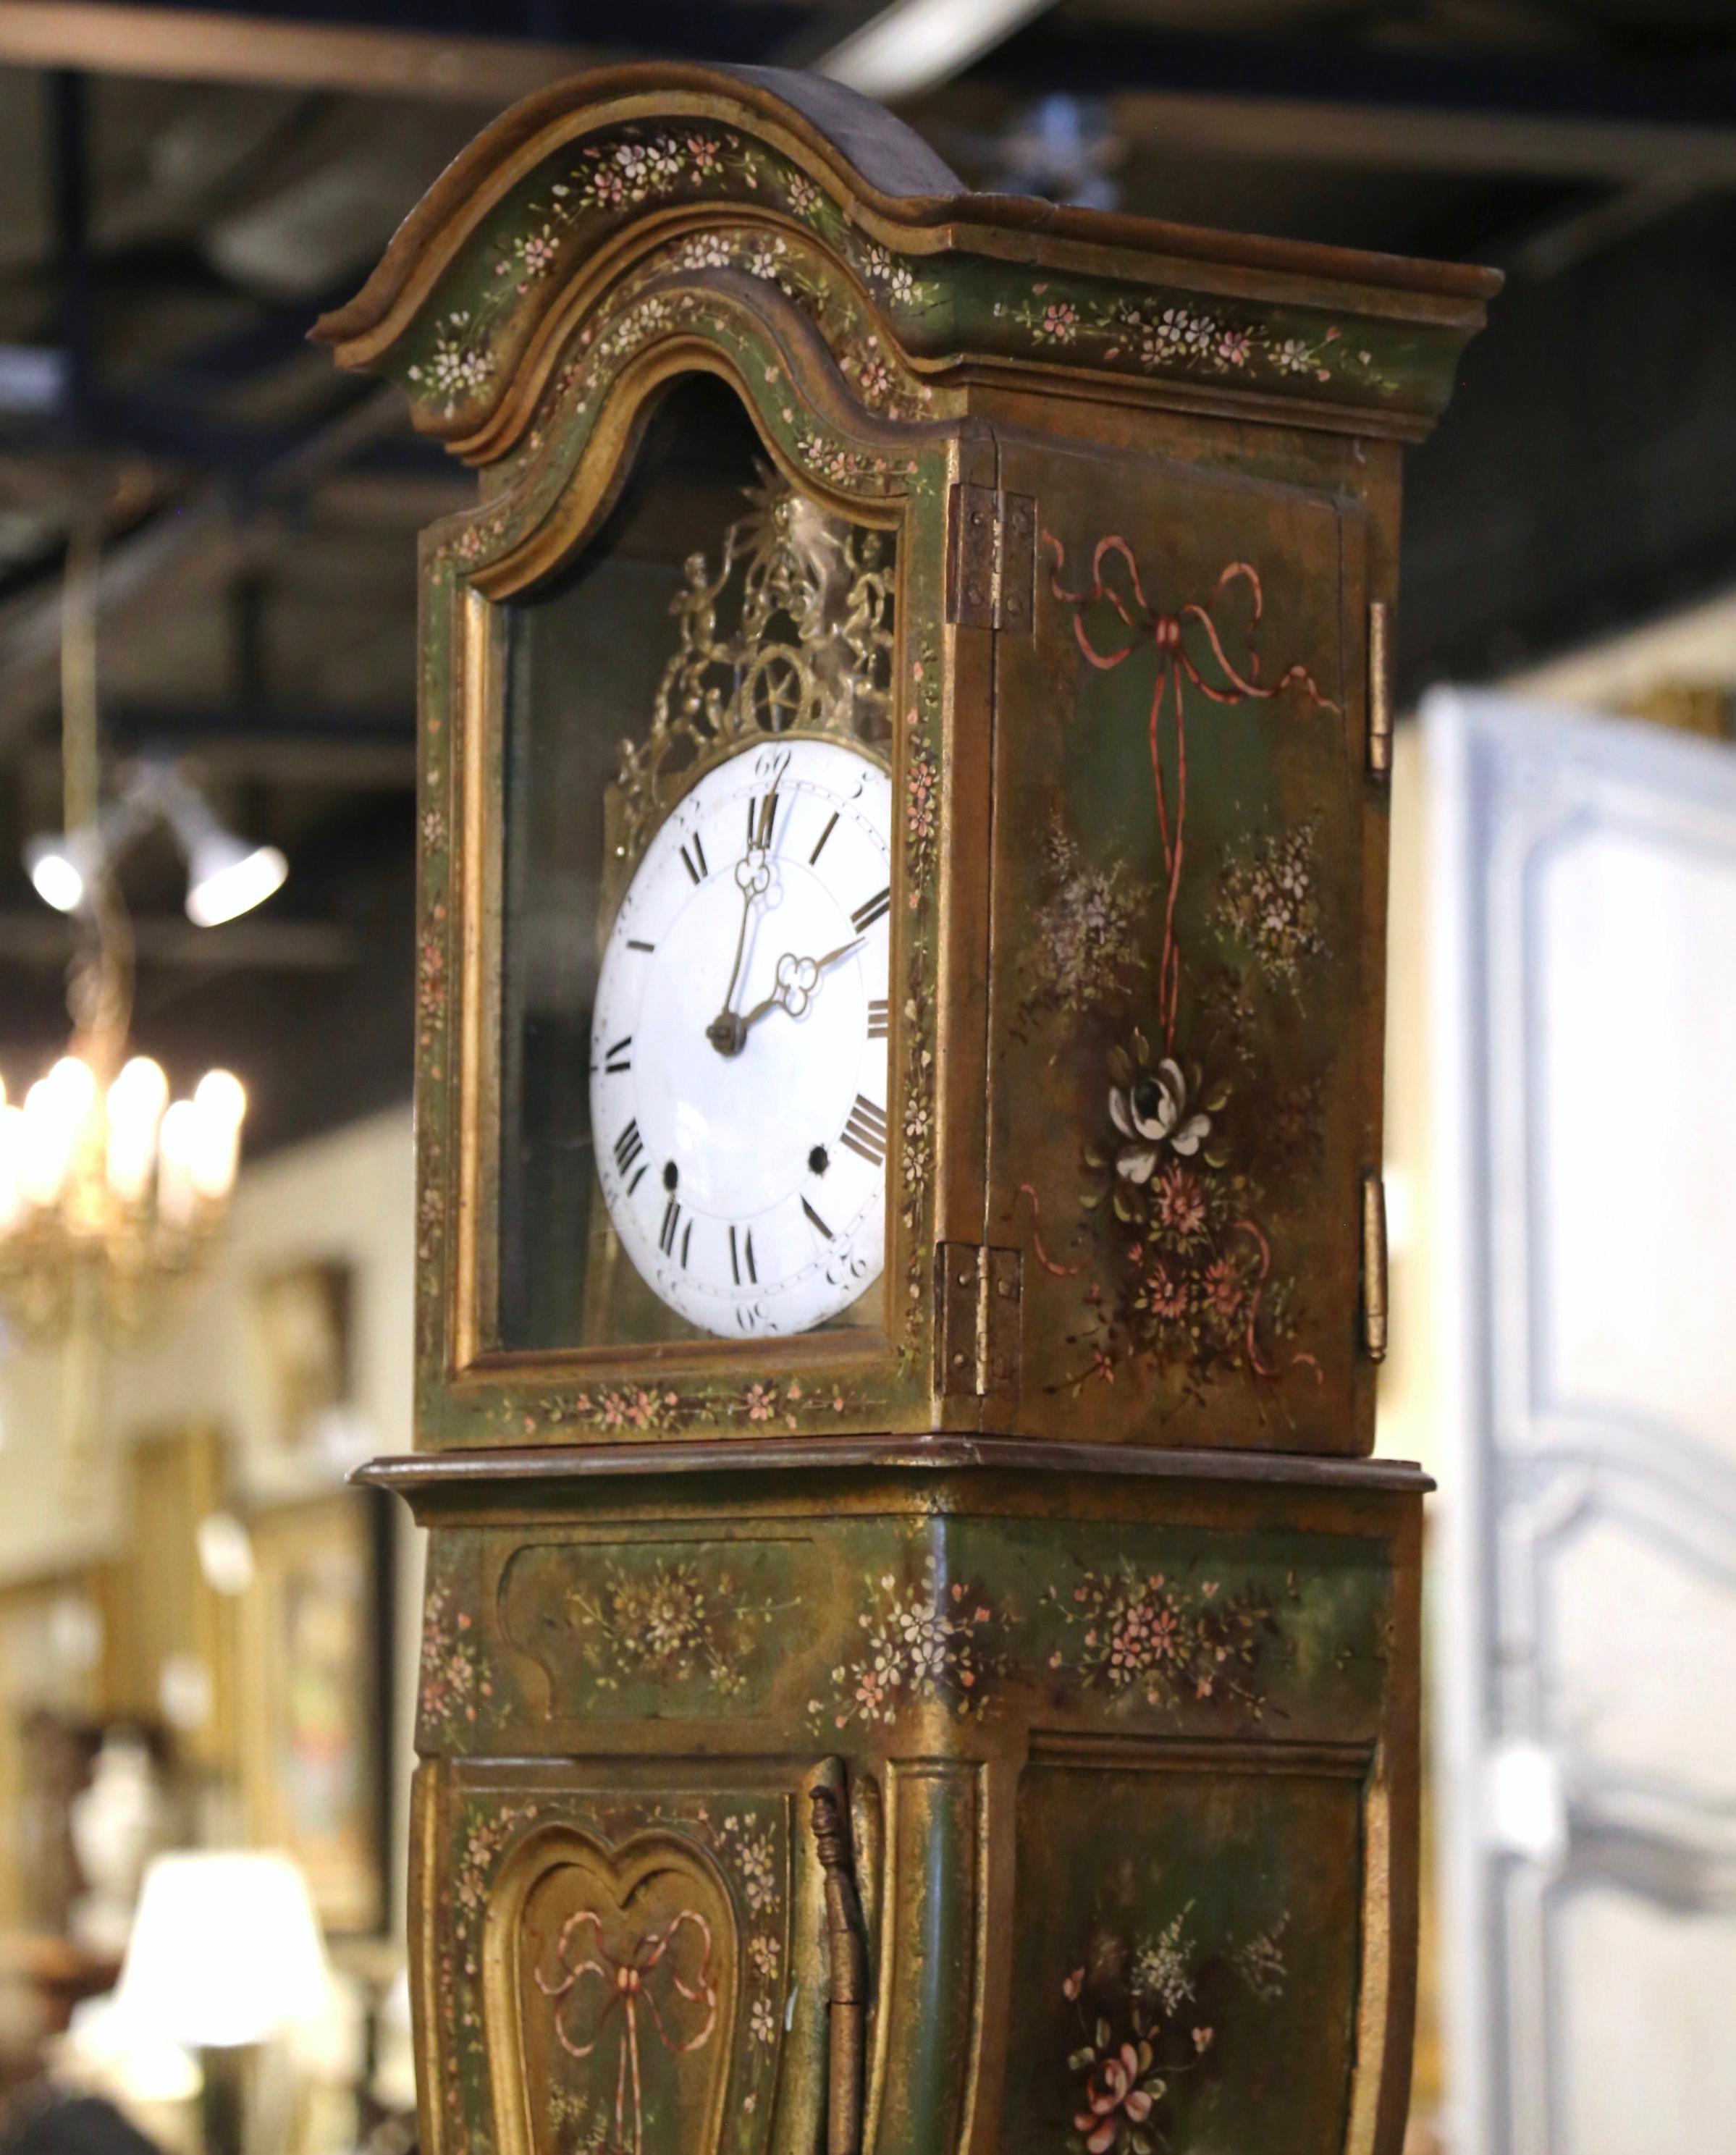 18 hands on a grandfather clock